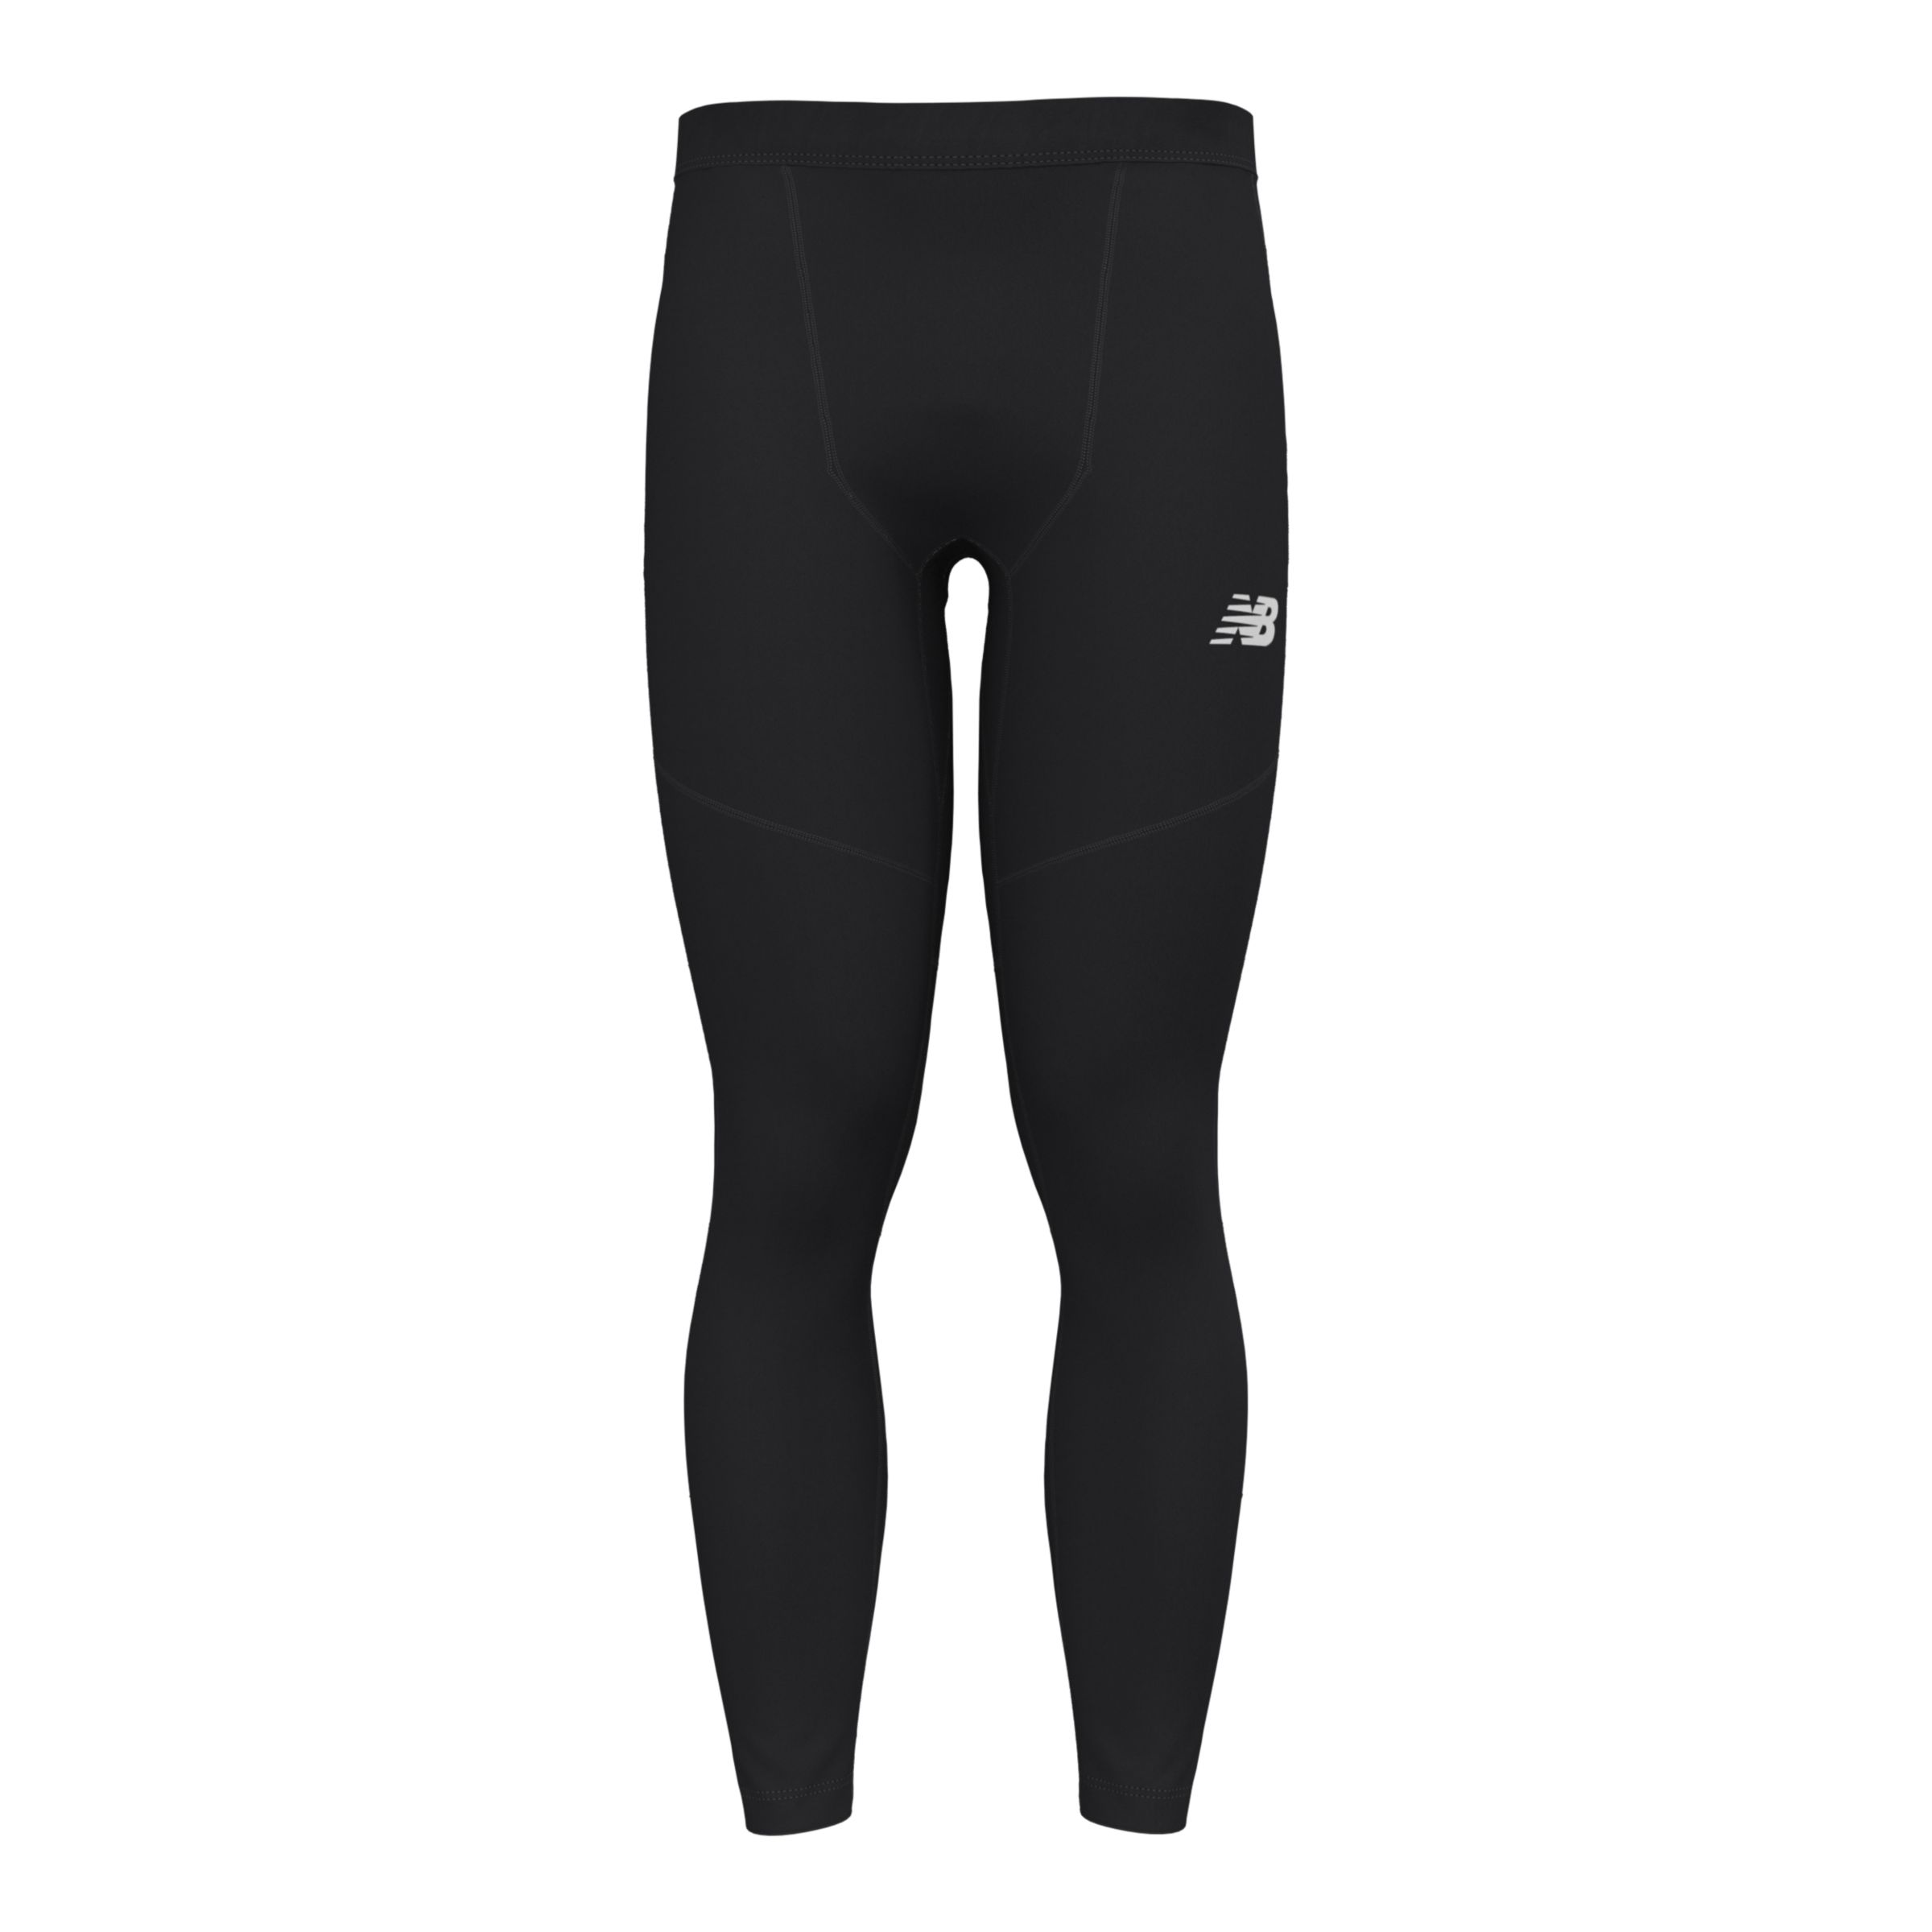 New Balance Accelerate Tight  Color block leggings, Fashion, Running tights